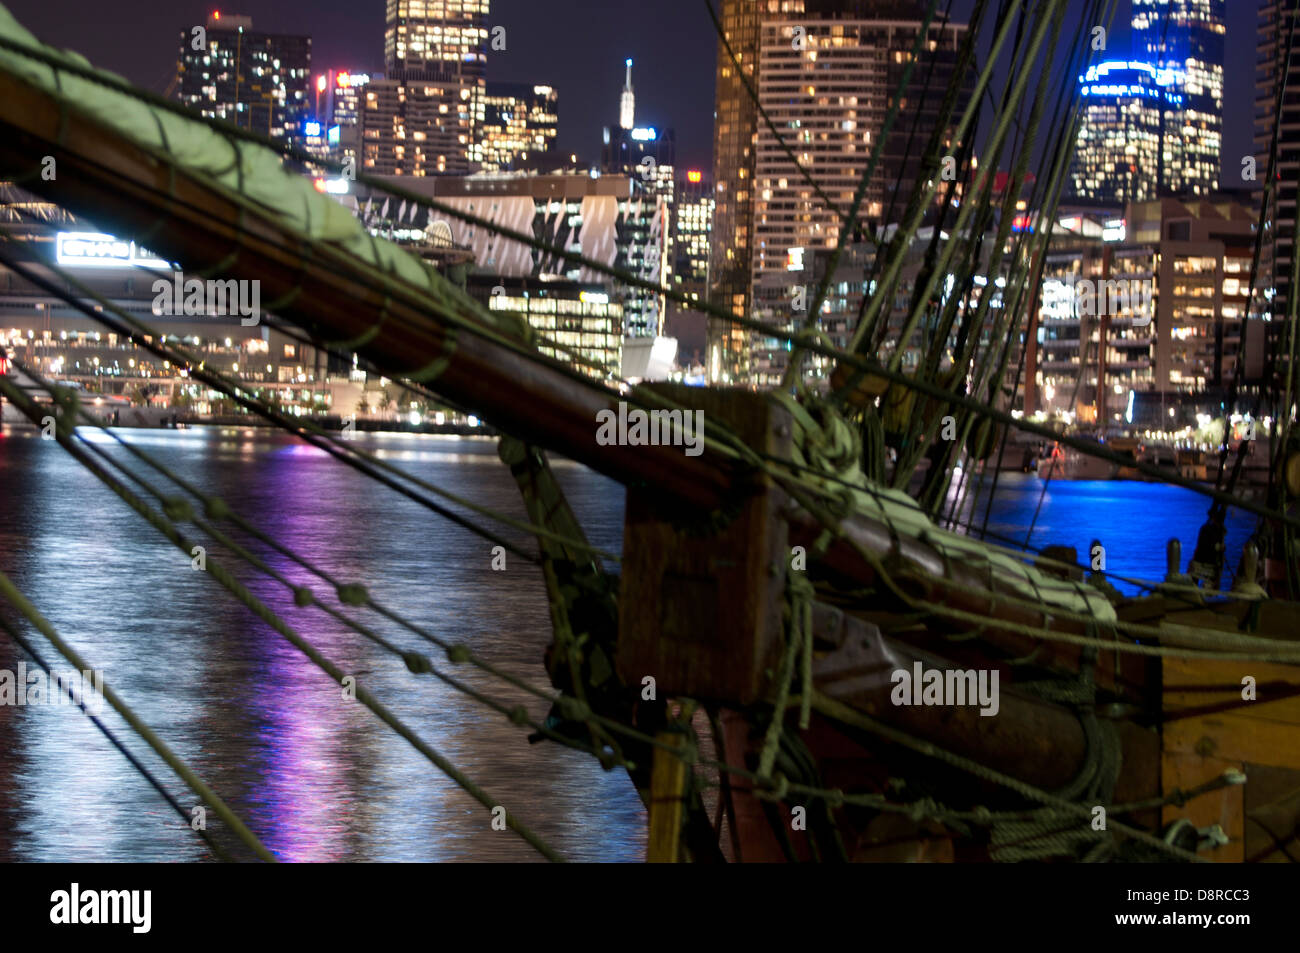 Melbourne city sky line at night with light reflection on water old rigged sail ship mask and sale at the foreground Stock Photo